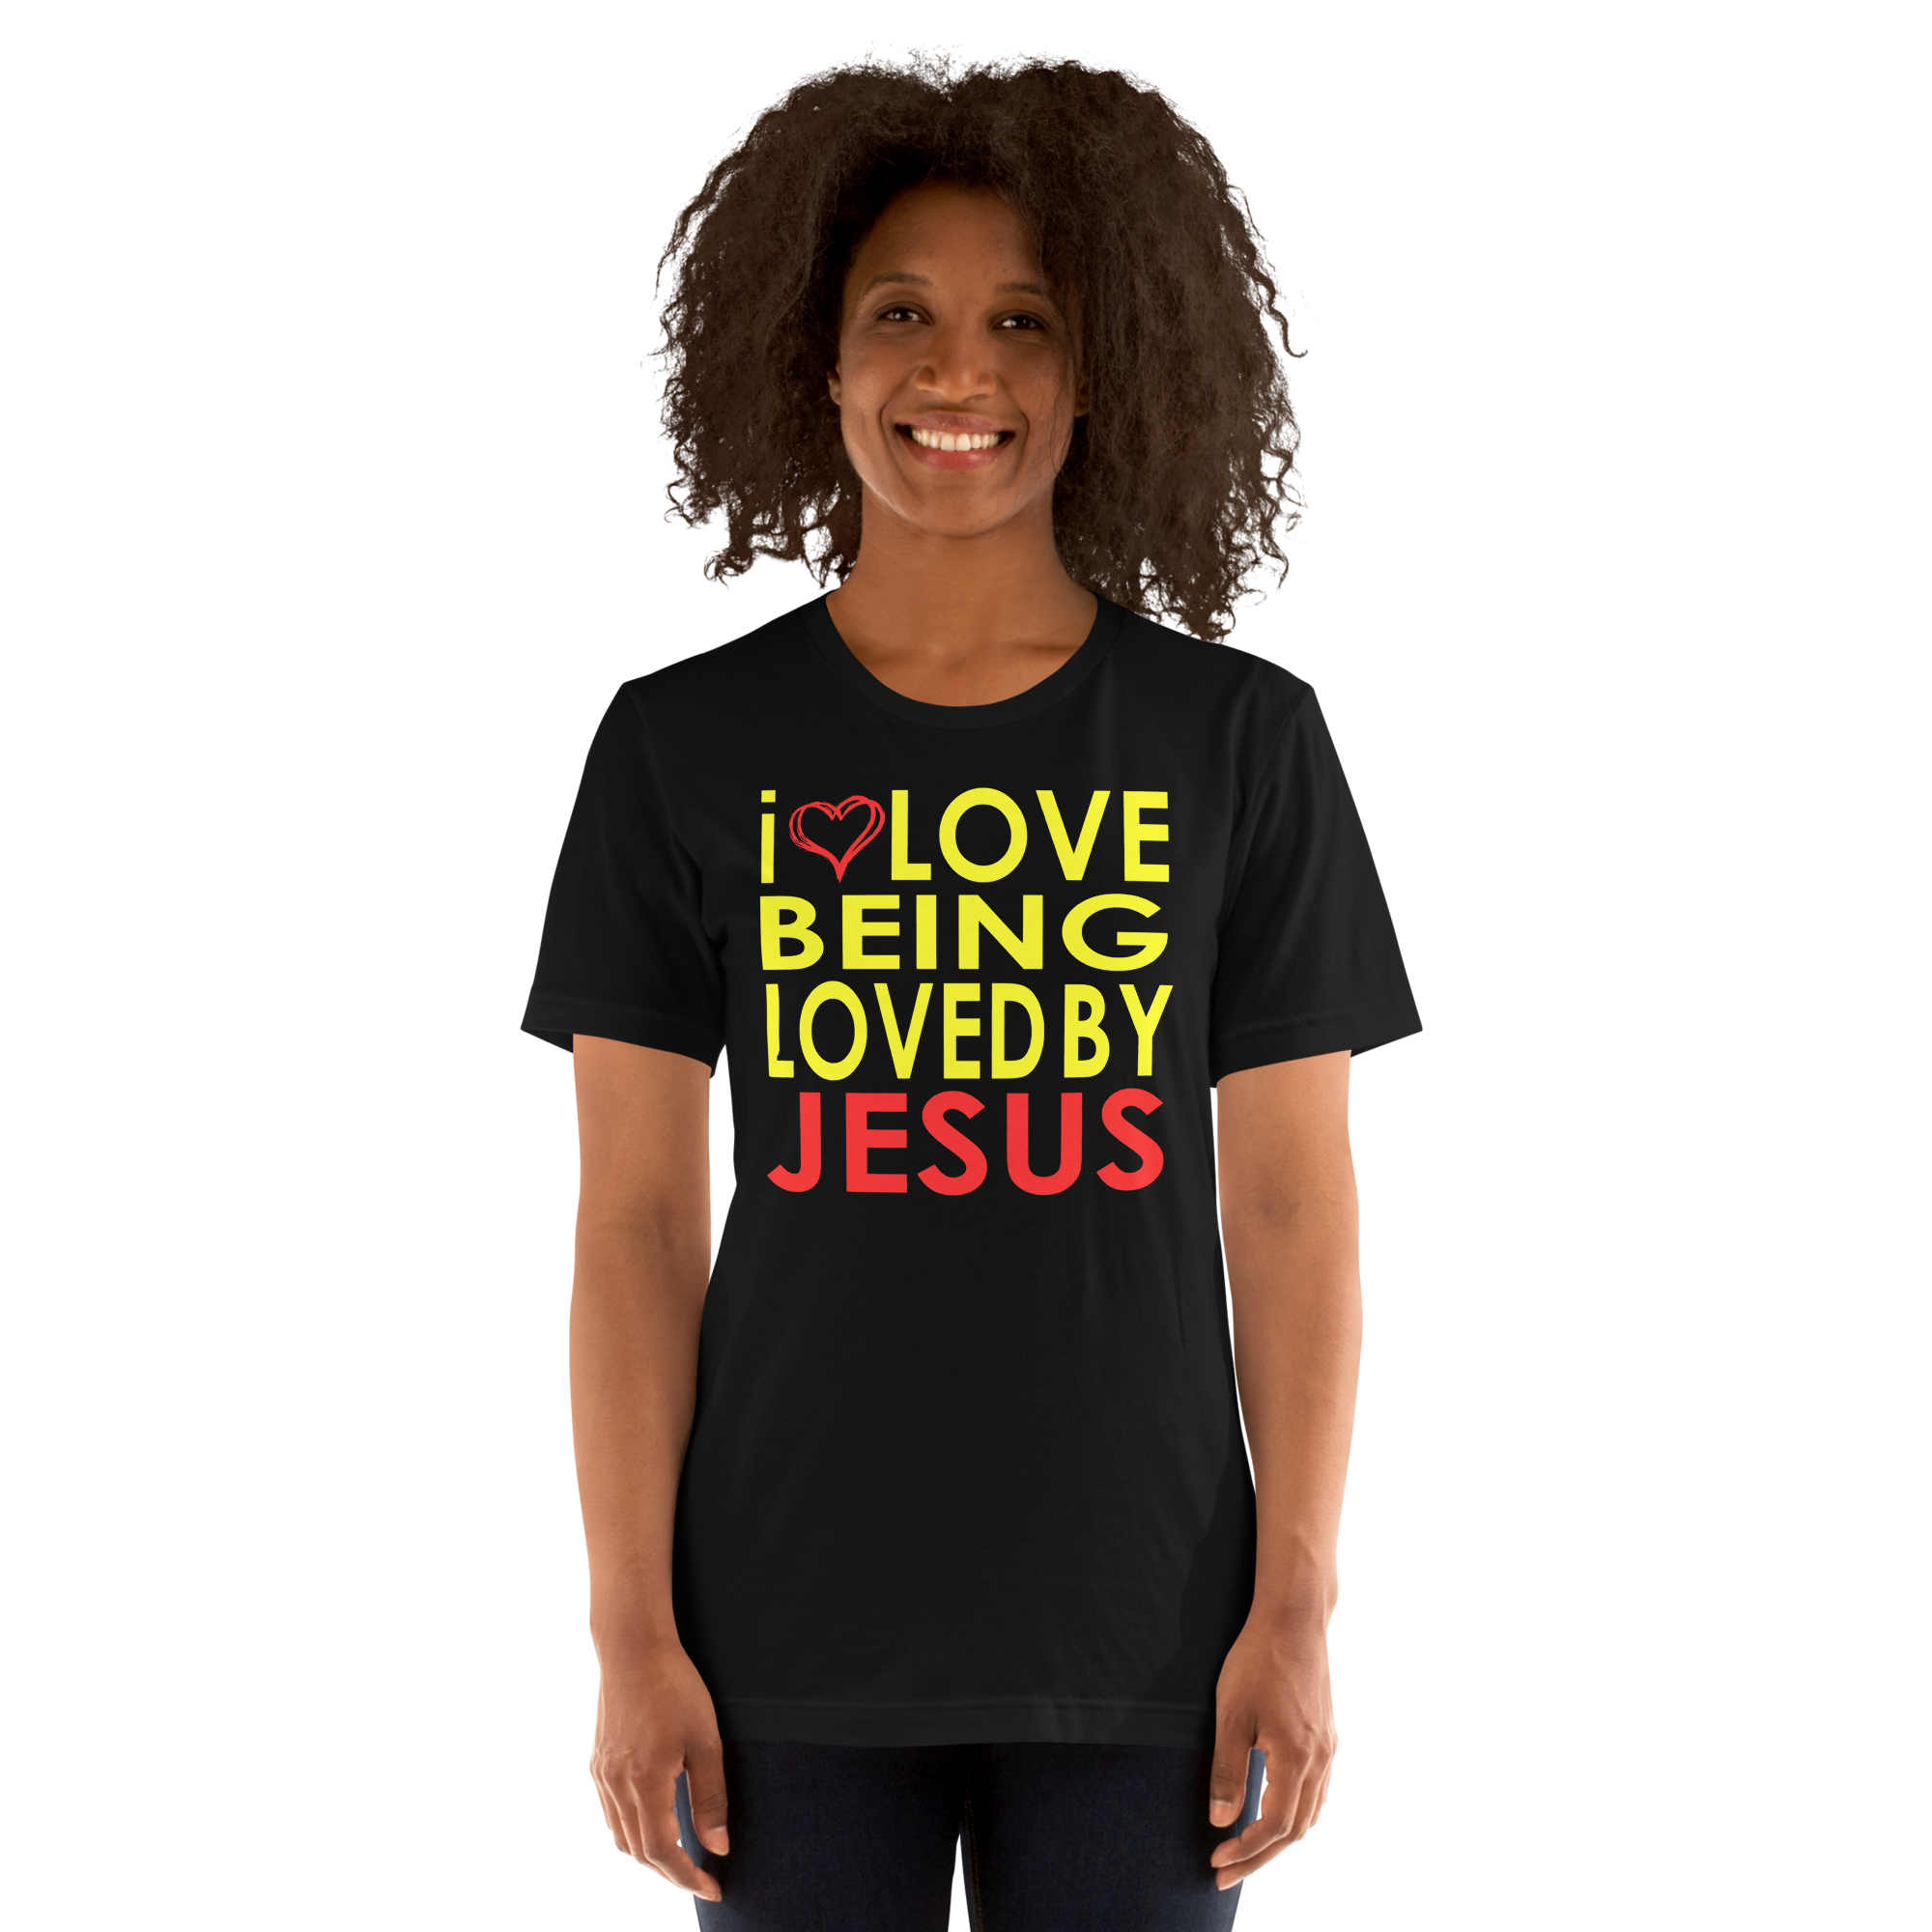 LOVED BY JESUS t-shirt